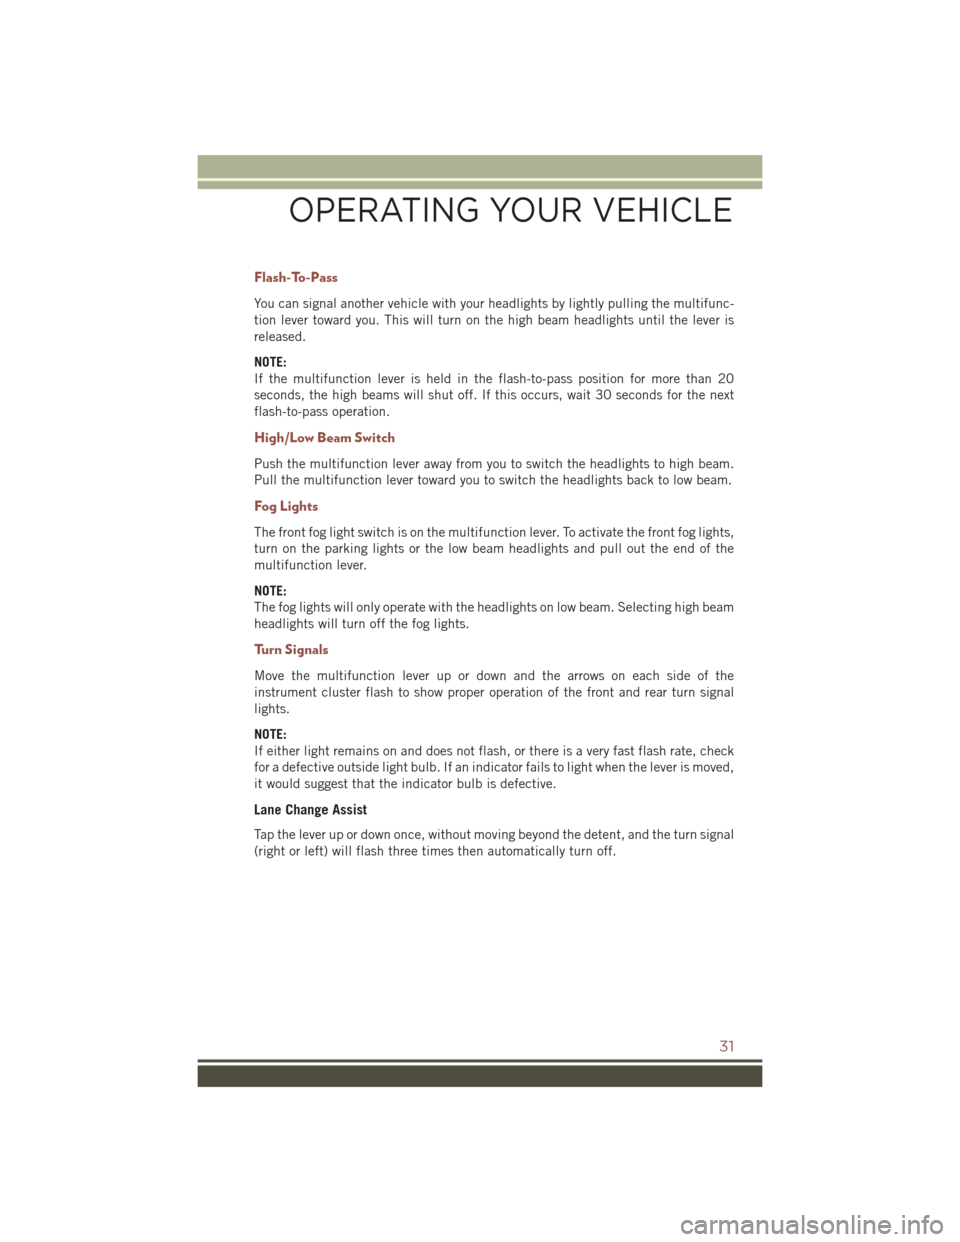 JEEP COMPASS 2016 1.G User Guide Flash-To-Pass
You can signal another vehicle with your headlights by lightly pulling the multifunc-
tion lever toward you. This will turn on the high beam headlights until the lever is
released.
NOTE: